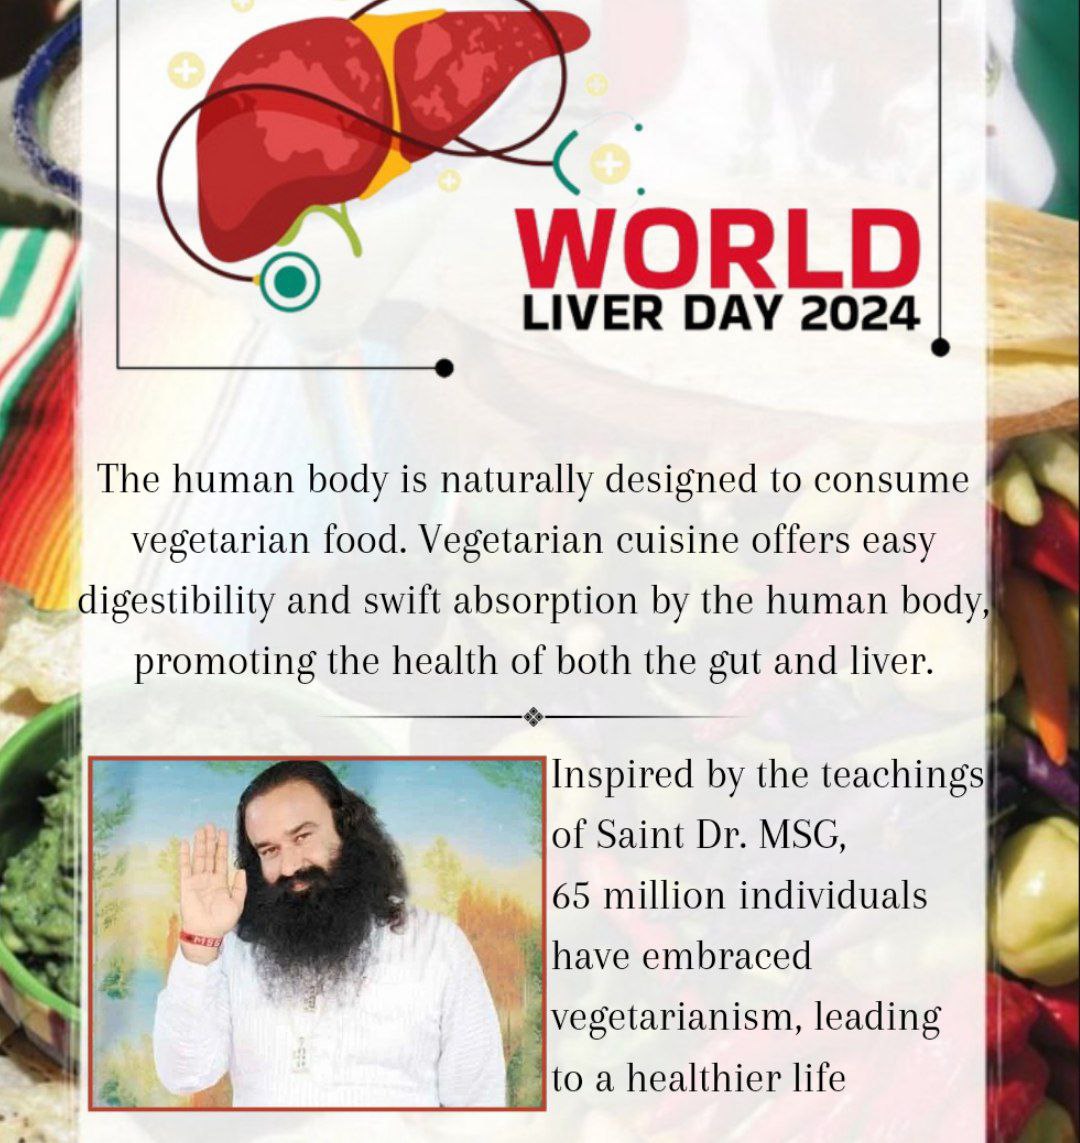 A healthy body is the real wealth of a human being. To prevent diseases like fatty liver etc., under the guidance of Saint Dr MSG Insan, lakhs of people of Dera Sacha Sauda take vegetarian diet, practice meditation daily and get their health checkups done on time.#WorldLiverDay